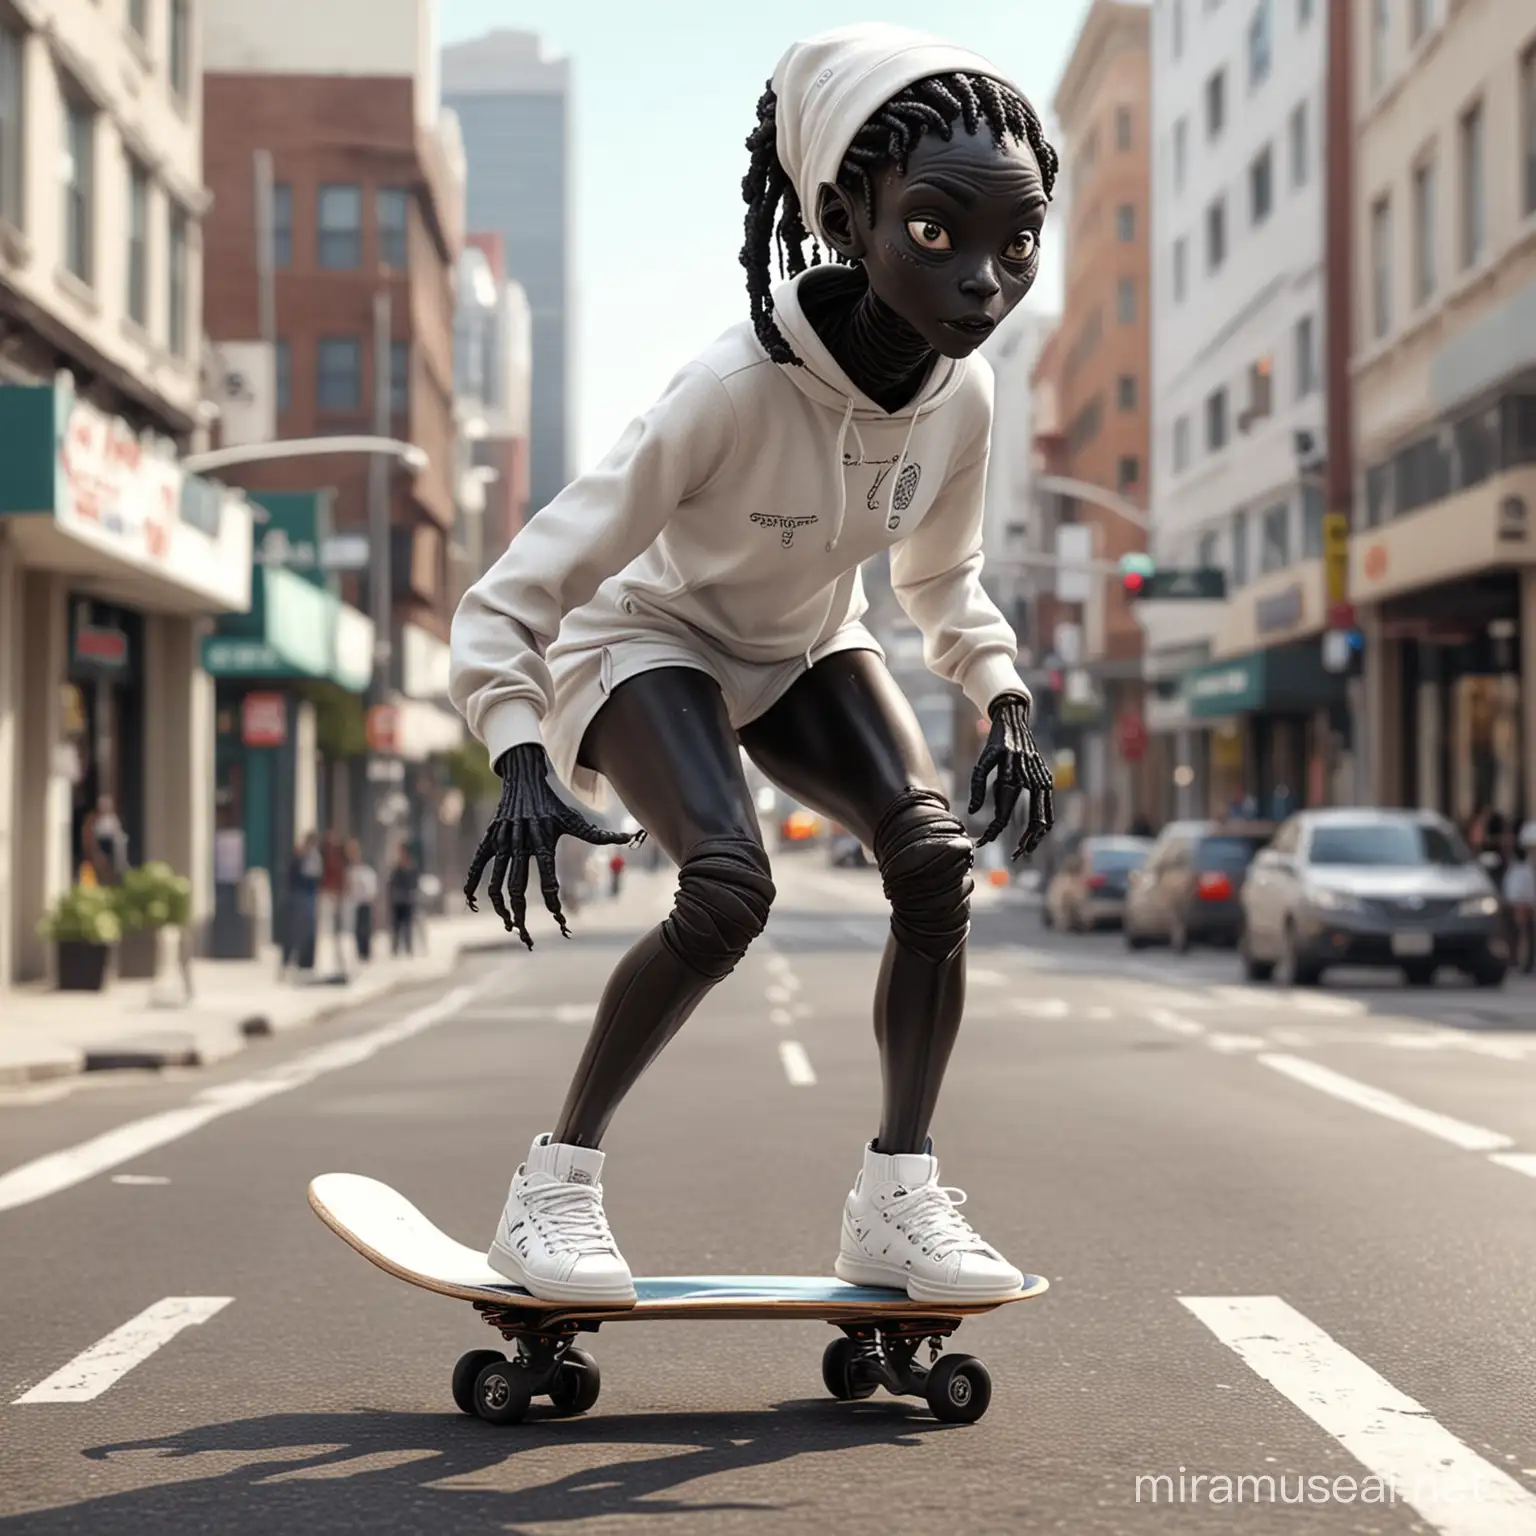 realistic cute and funny female black alien with entrails on her face but a nice body riding a skatboard in white skater clothing, la city streets, full body